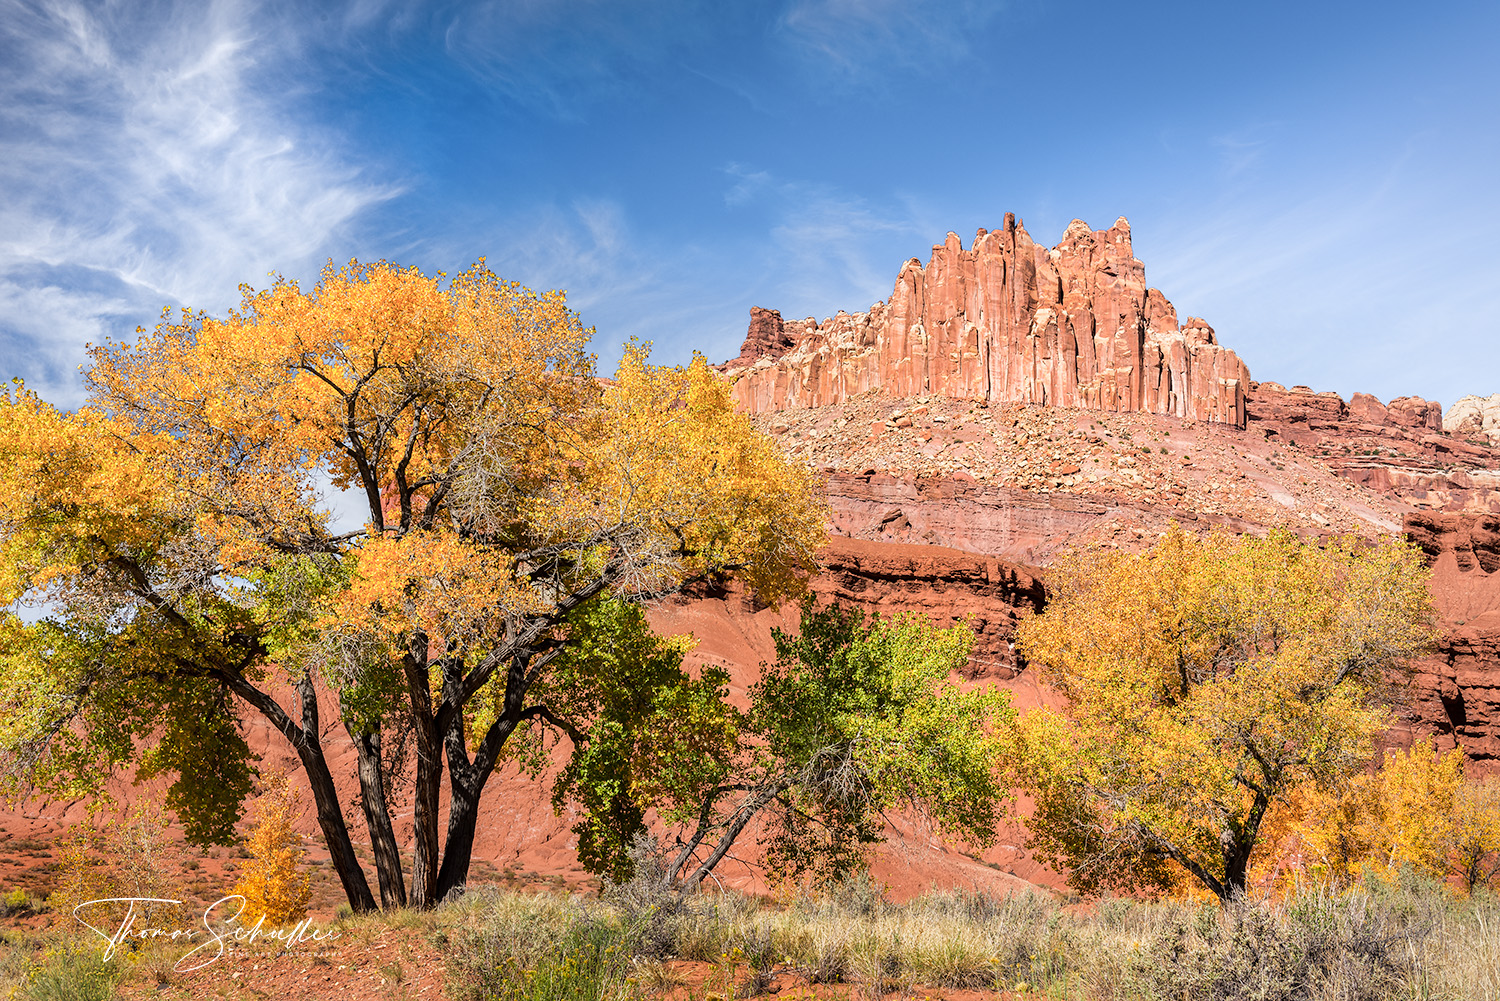 The Castle is a prominent sandstone formation near the oasis of Fruita in Capitol Reef National Park Utah 